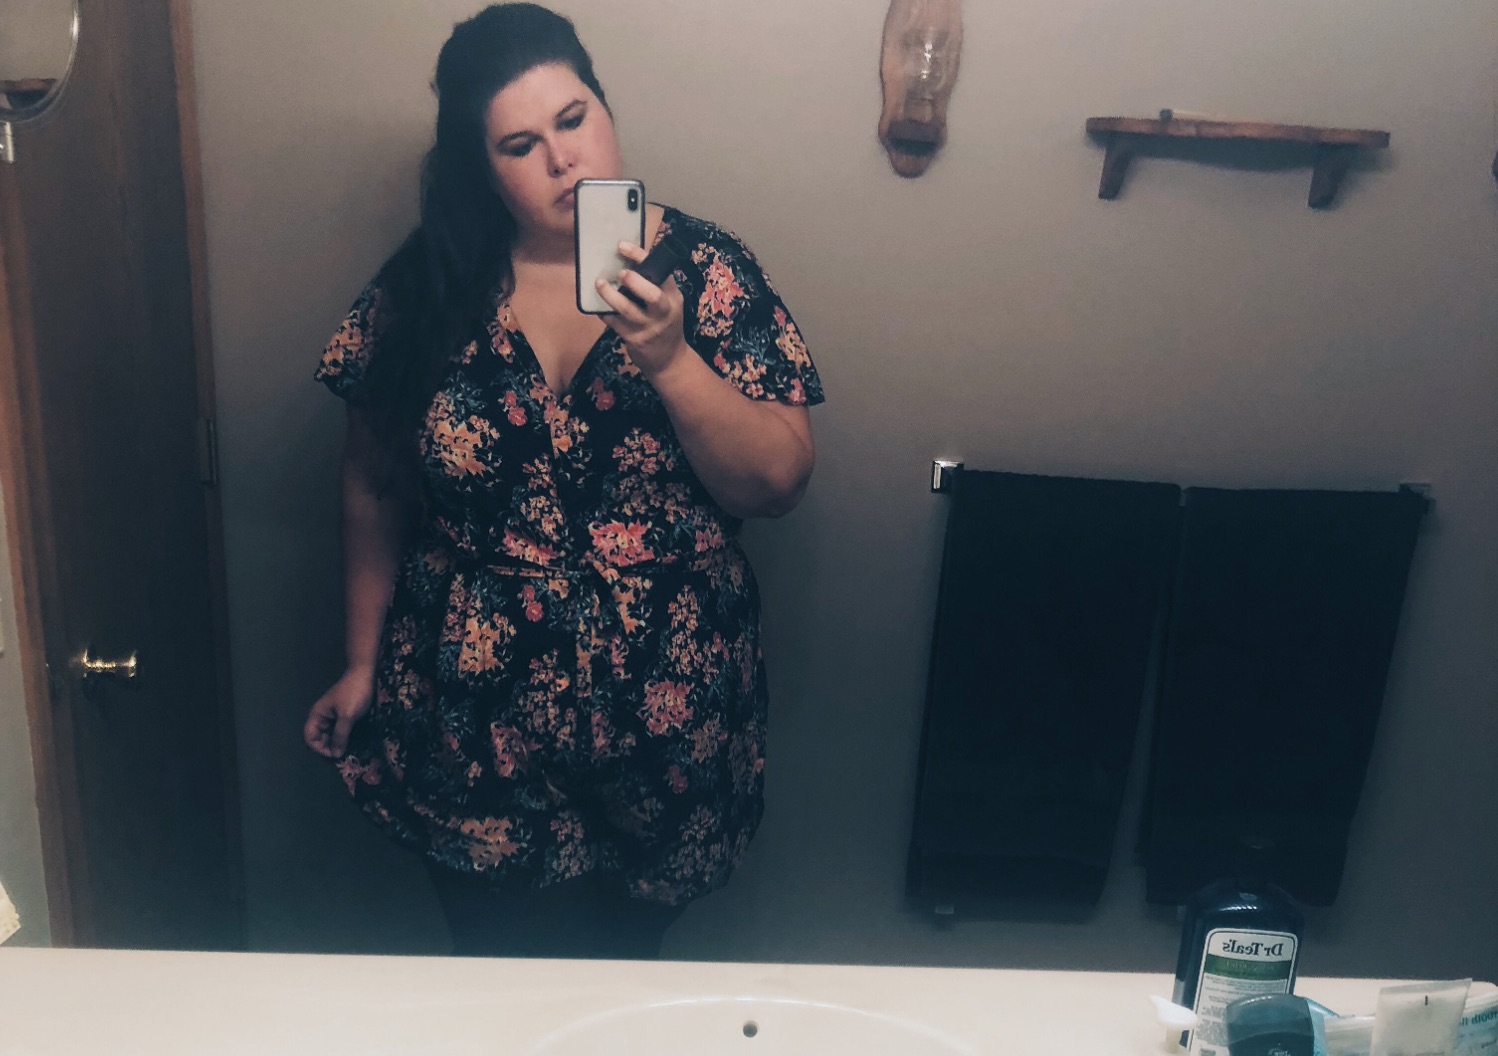 A Few Small Things That Have Helped Me Love My Body Lately